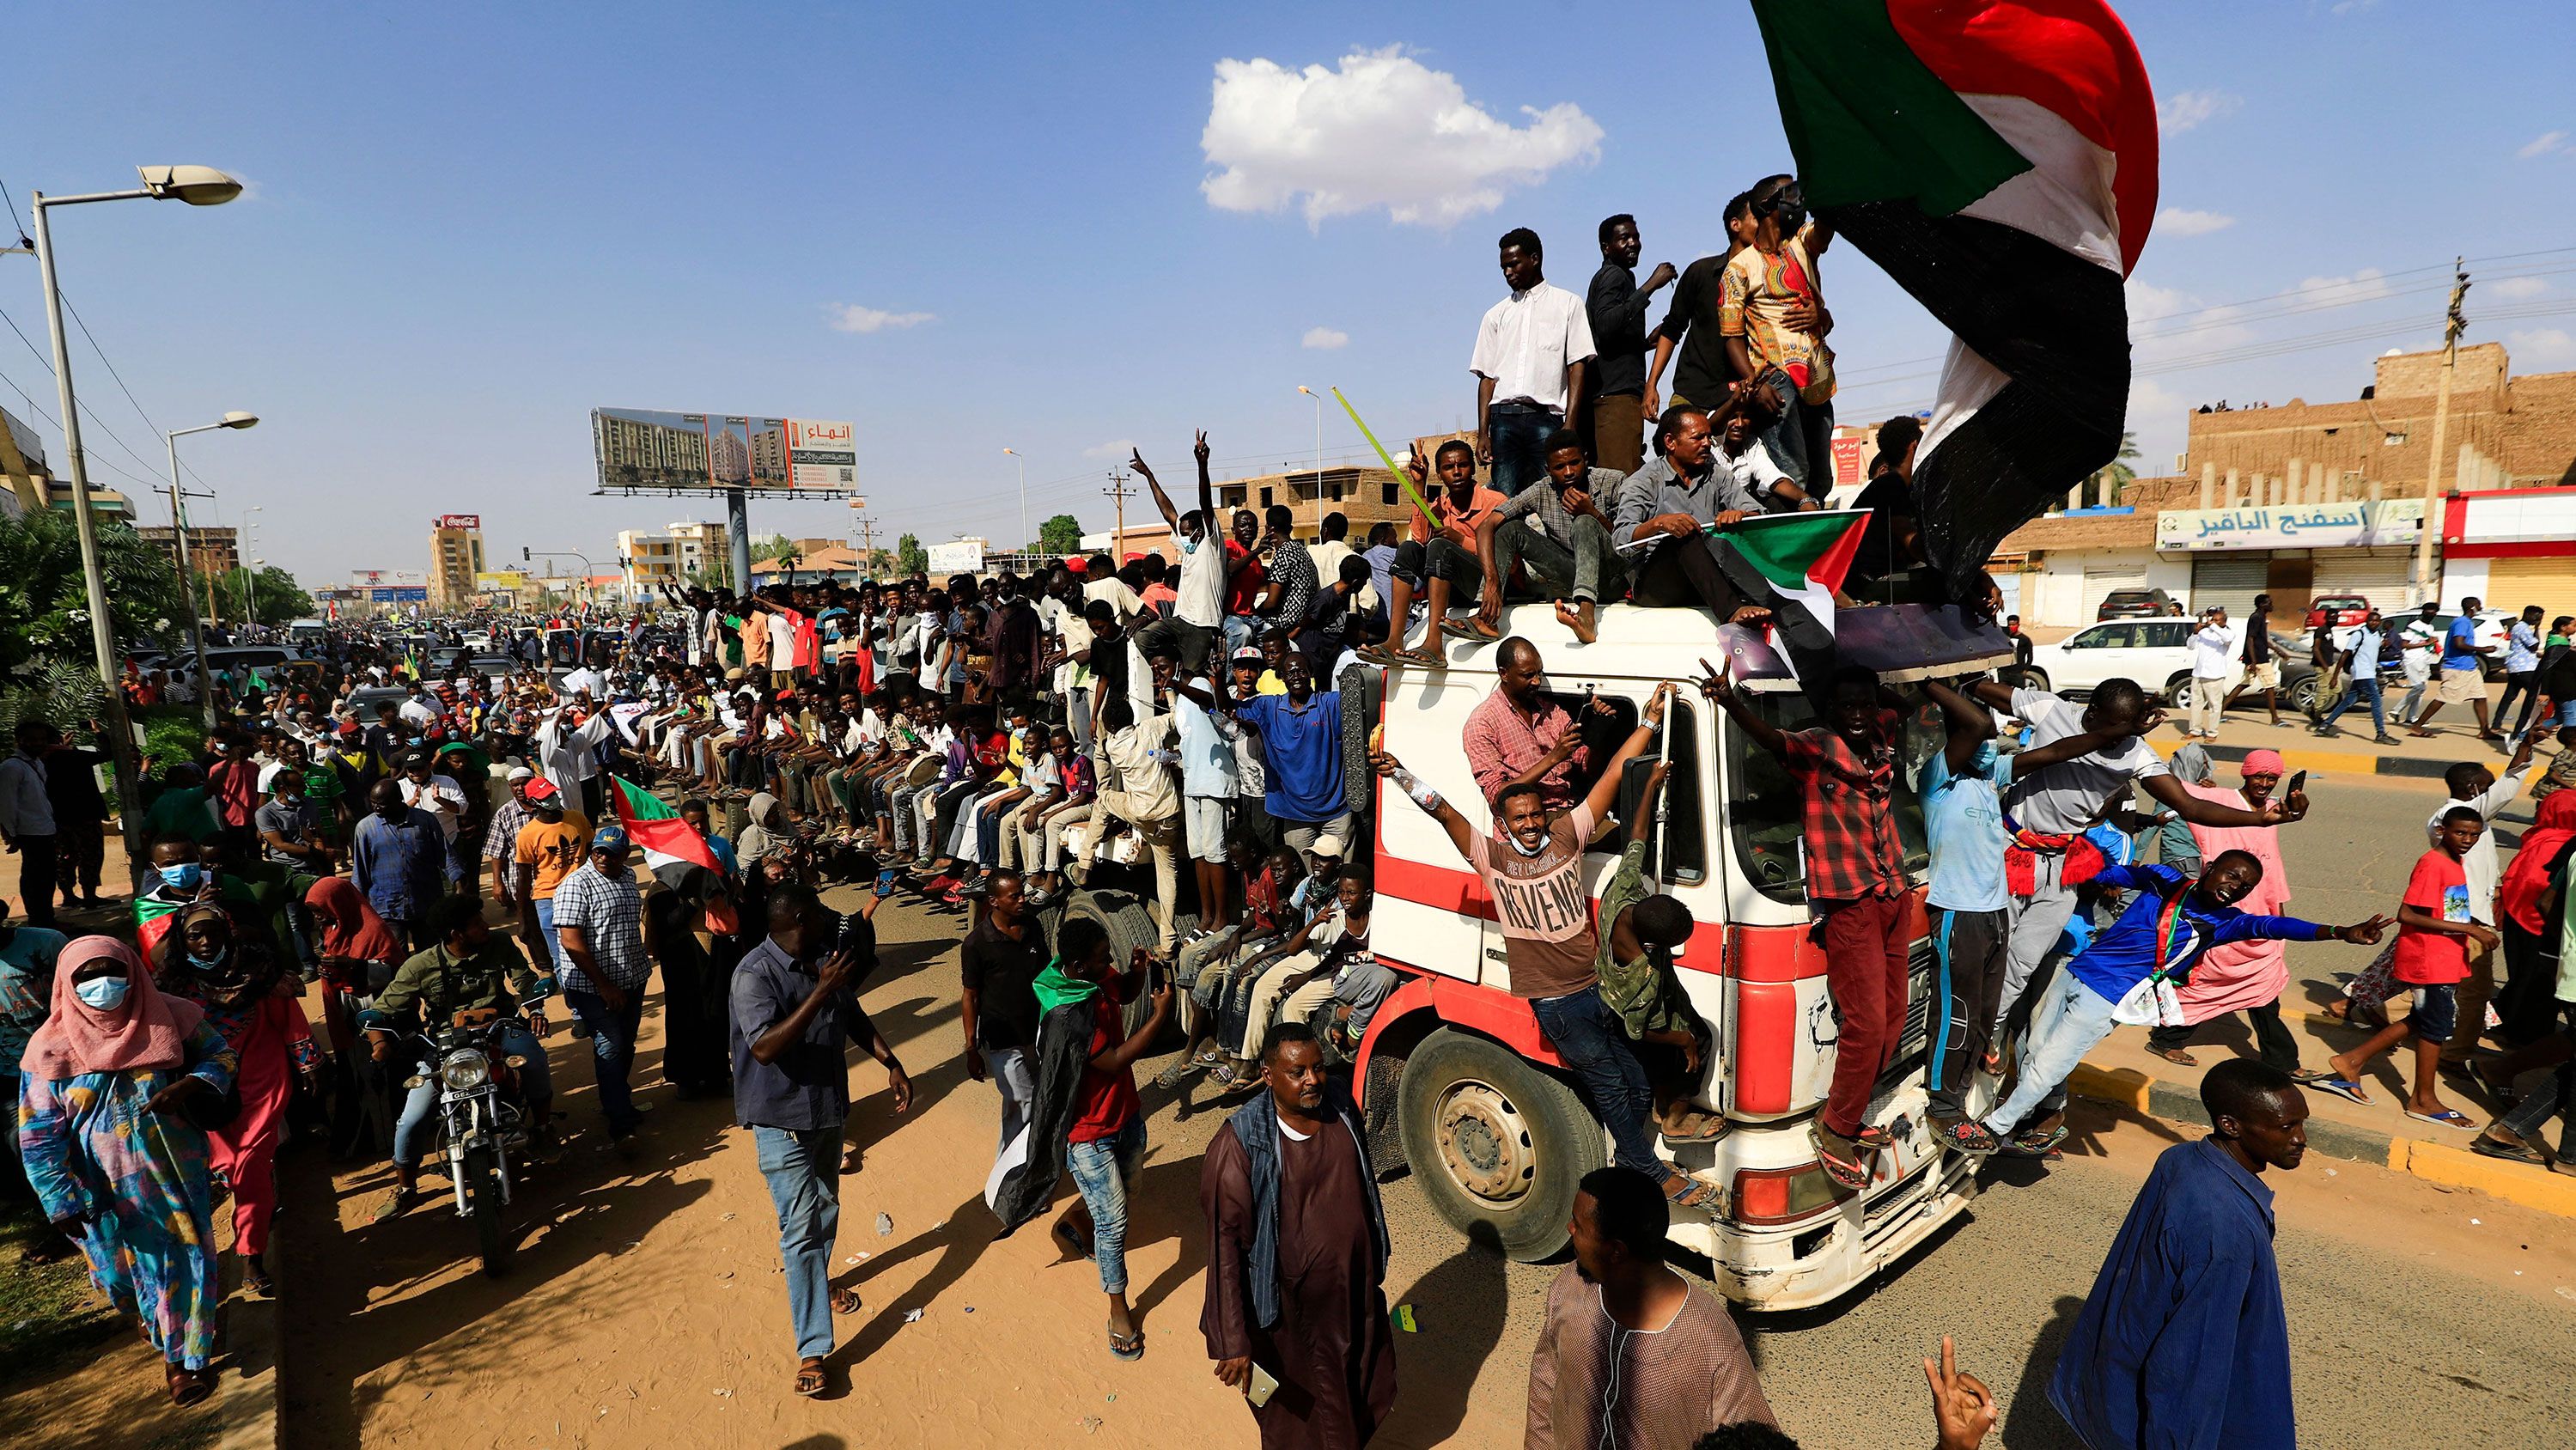 Sudanese demonstrators take to the streets of the capital Khartoum to demand the government's transition to civilian rule on October 21.